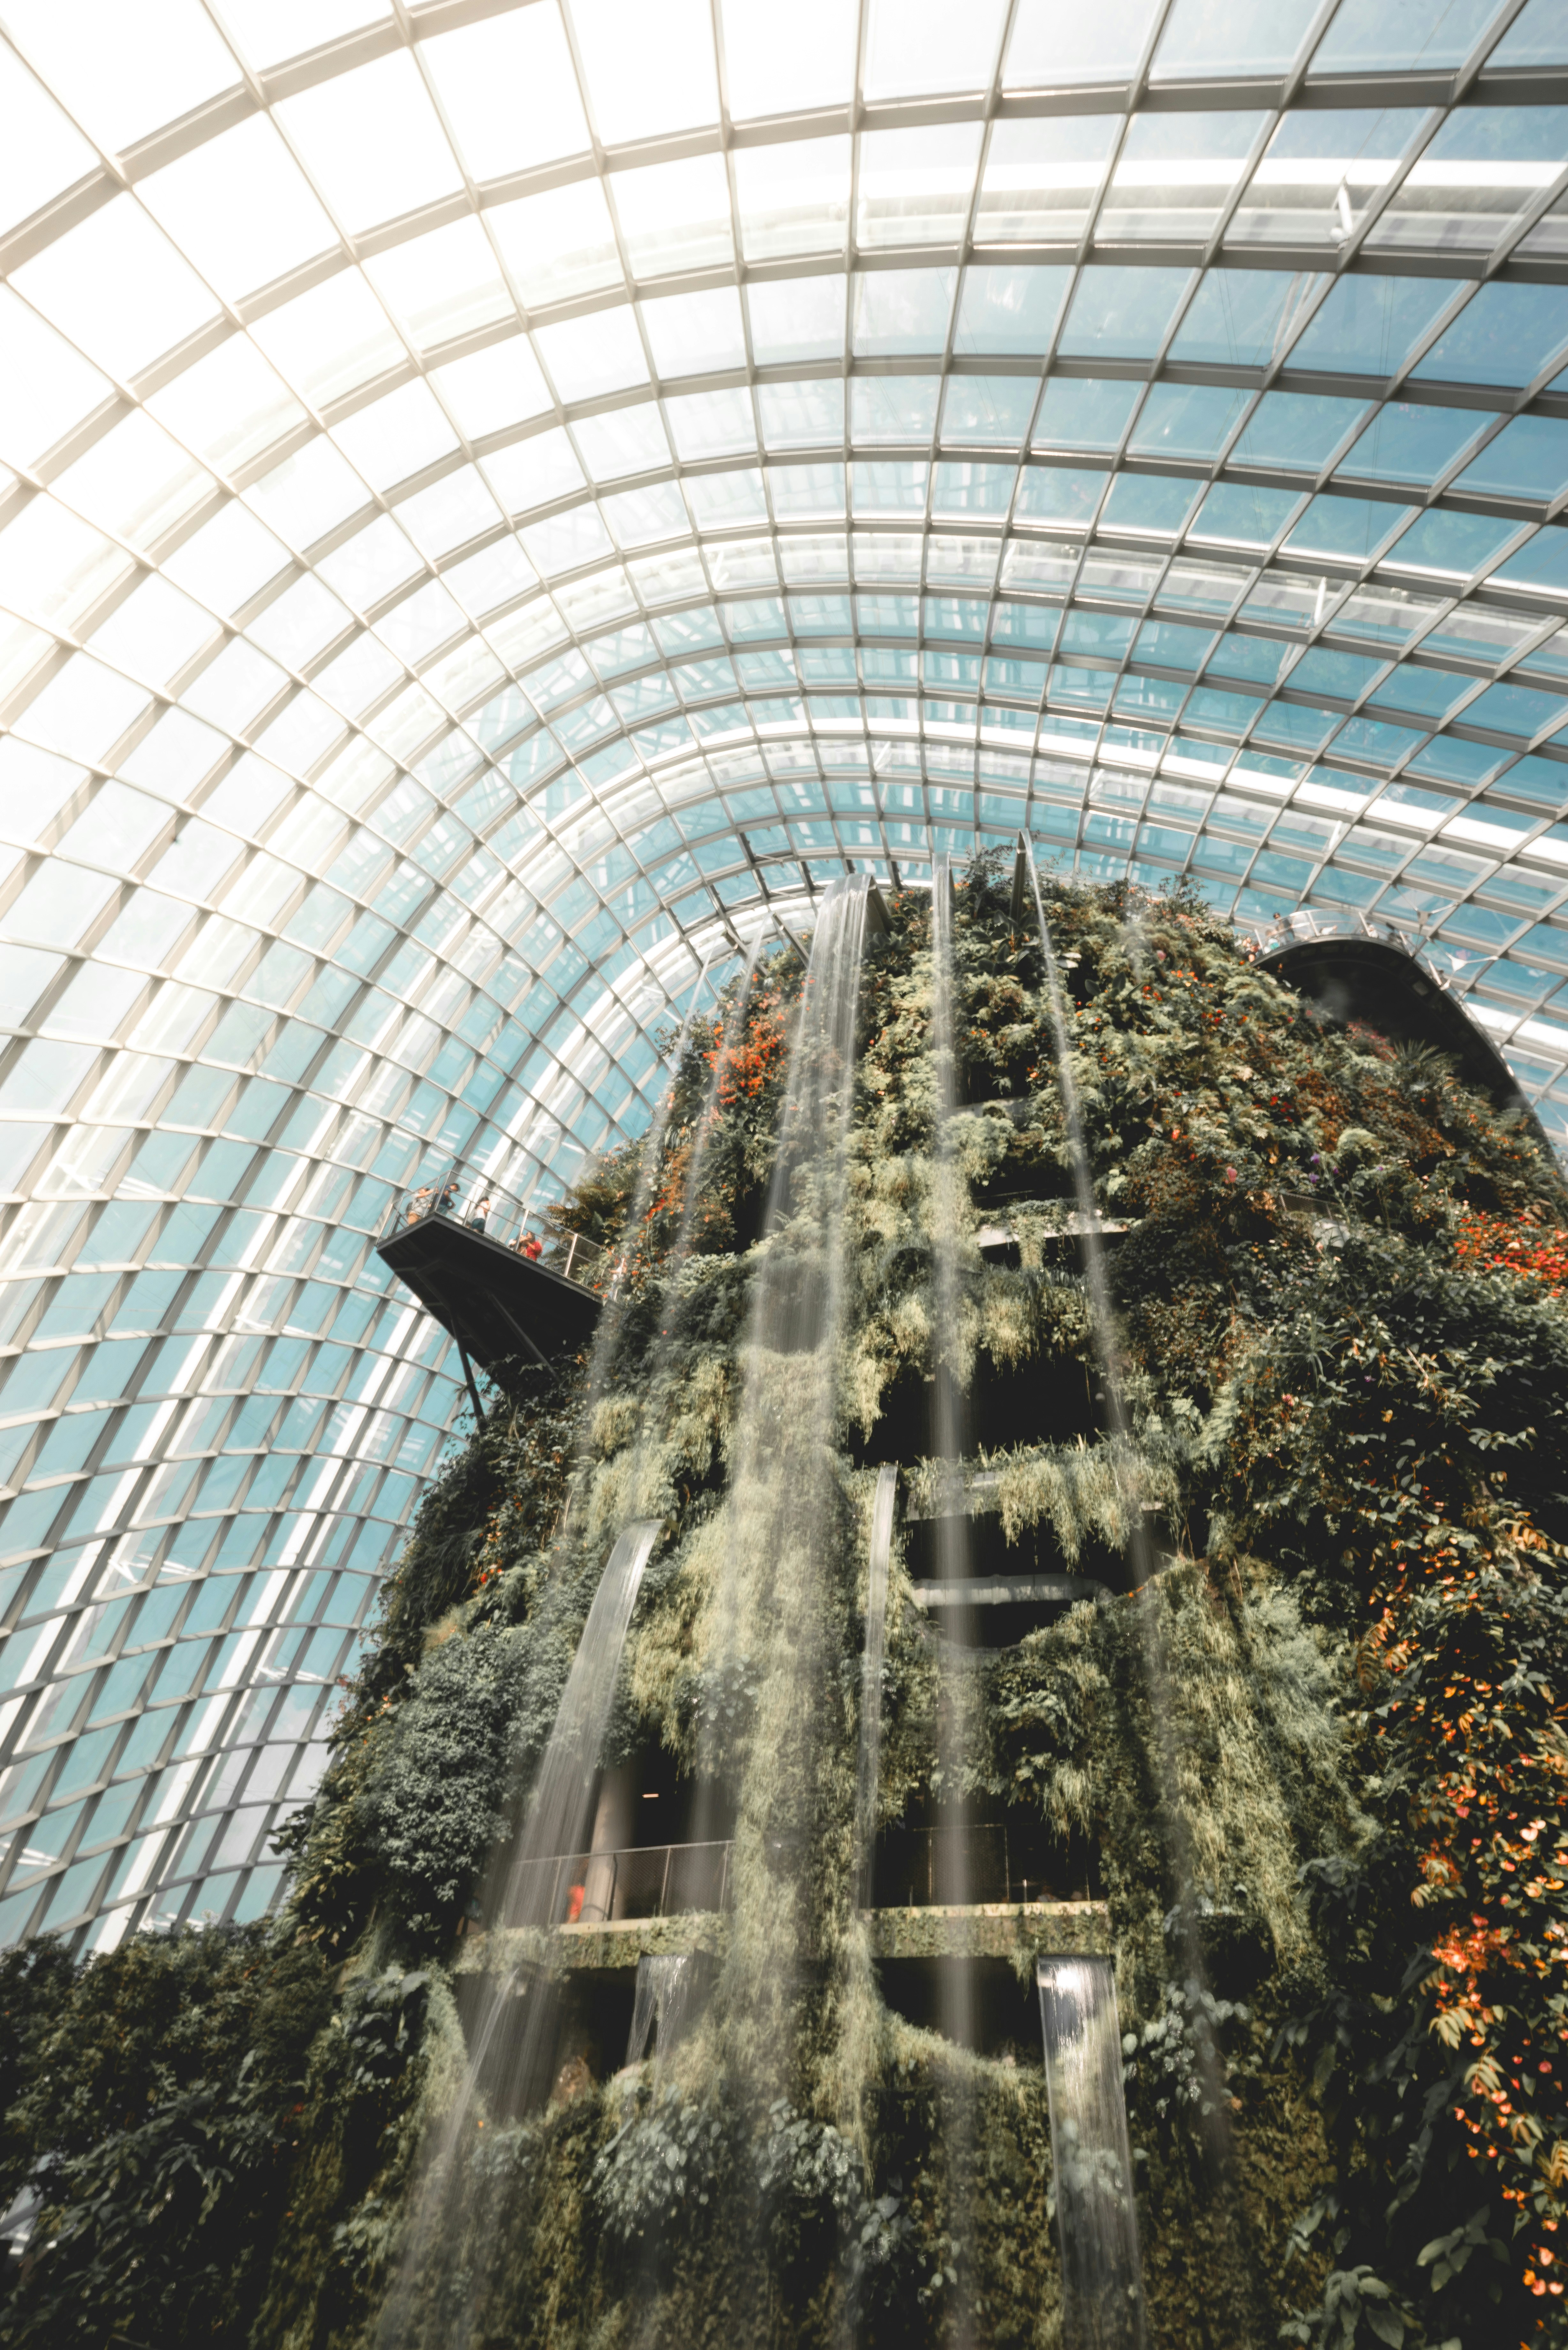 The Cloud Forest in Singapore is incredible! You feel like you are in year 3018. As I entered the bio-dome, I was greeted with this waterfall that rained down mist on everyone. I spent the rest of the time zig-zagging up skywalks to the top of the mountain in the middle.